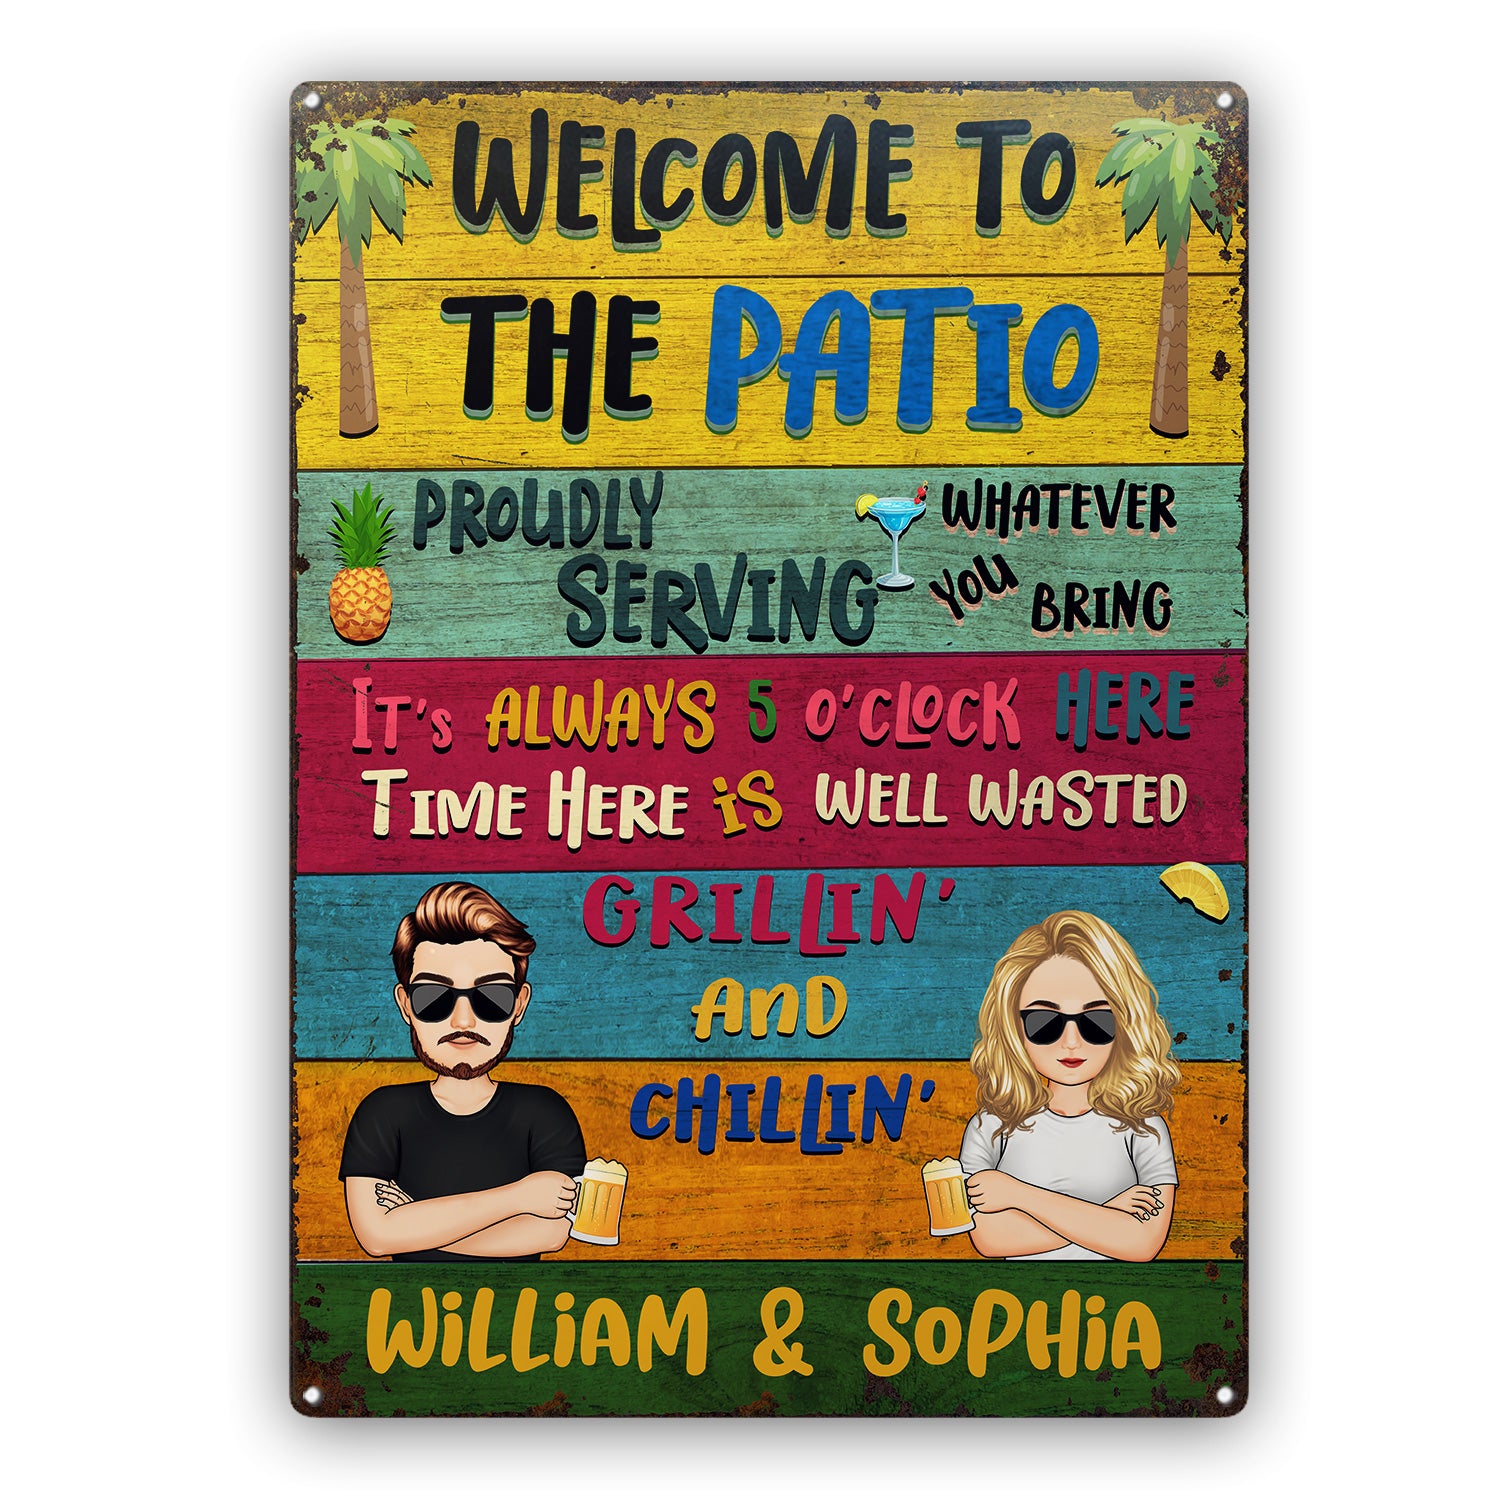 Patio Welcome Grilling Proudly Serving Whatever You Bring Cartoon Couple Single - Home Decor, Backyard Decor, Gift For Her, Him, Family, Husband, Wife - Personalized Custom Classic Metal Signs